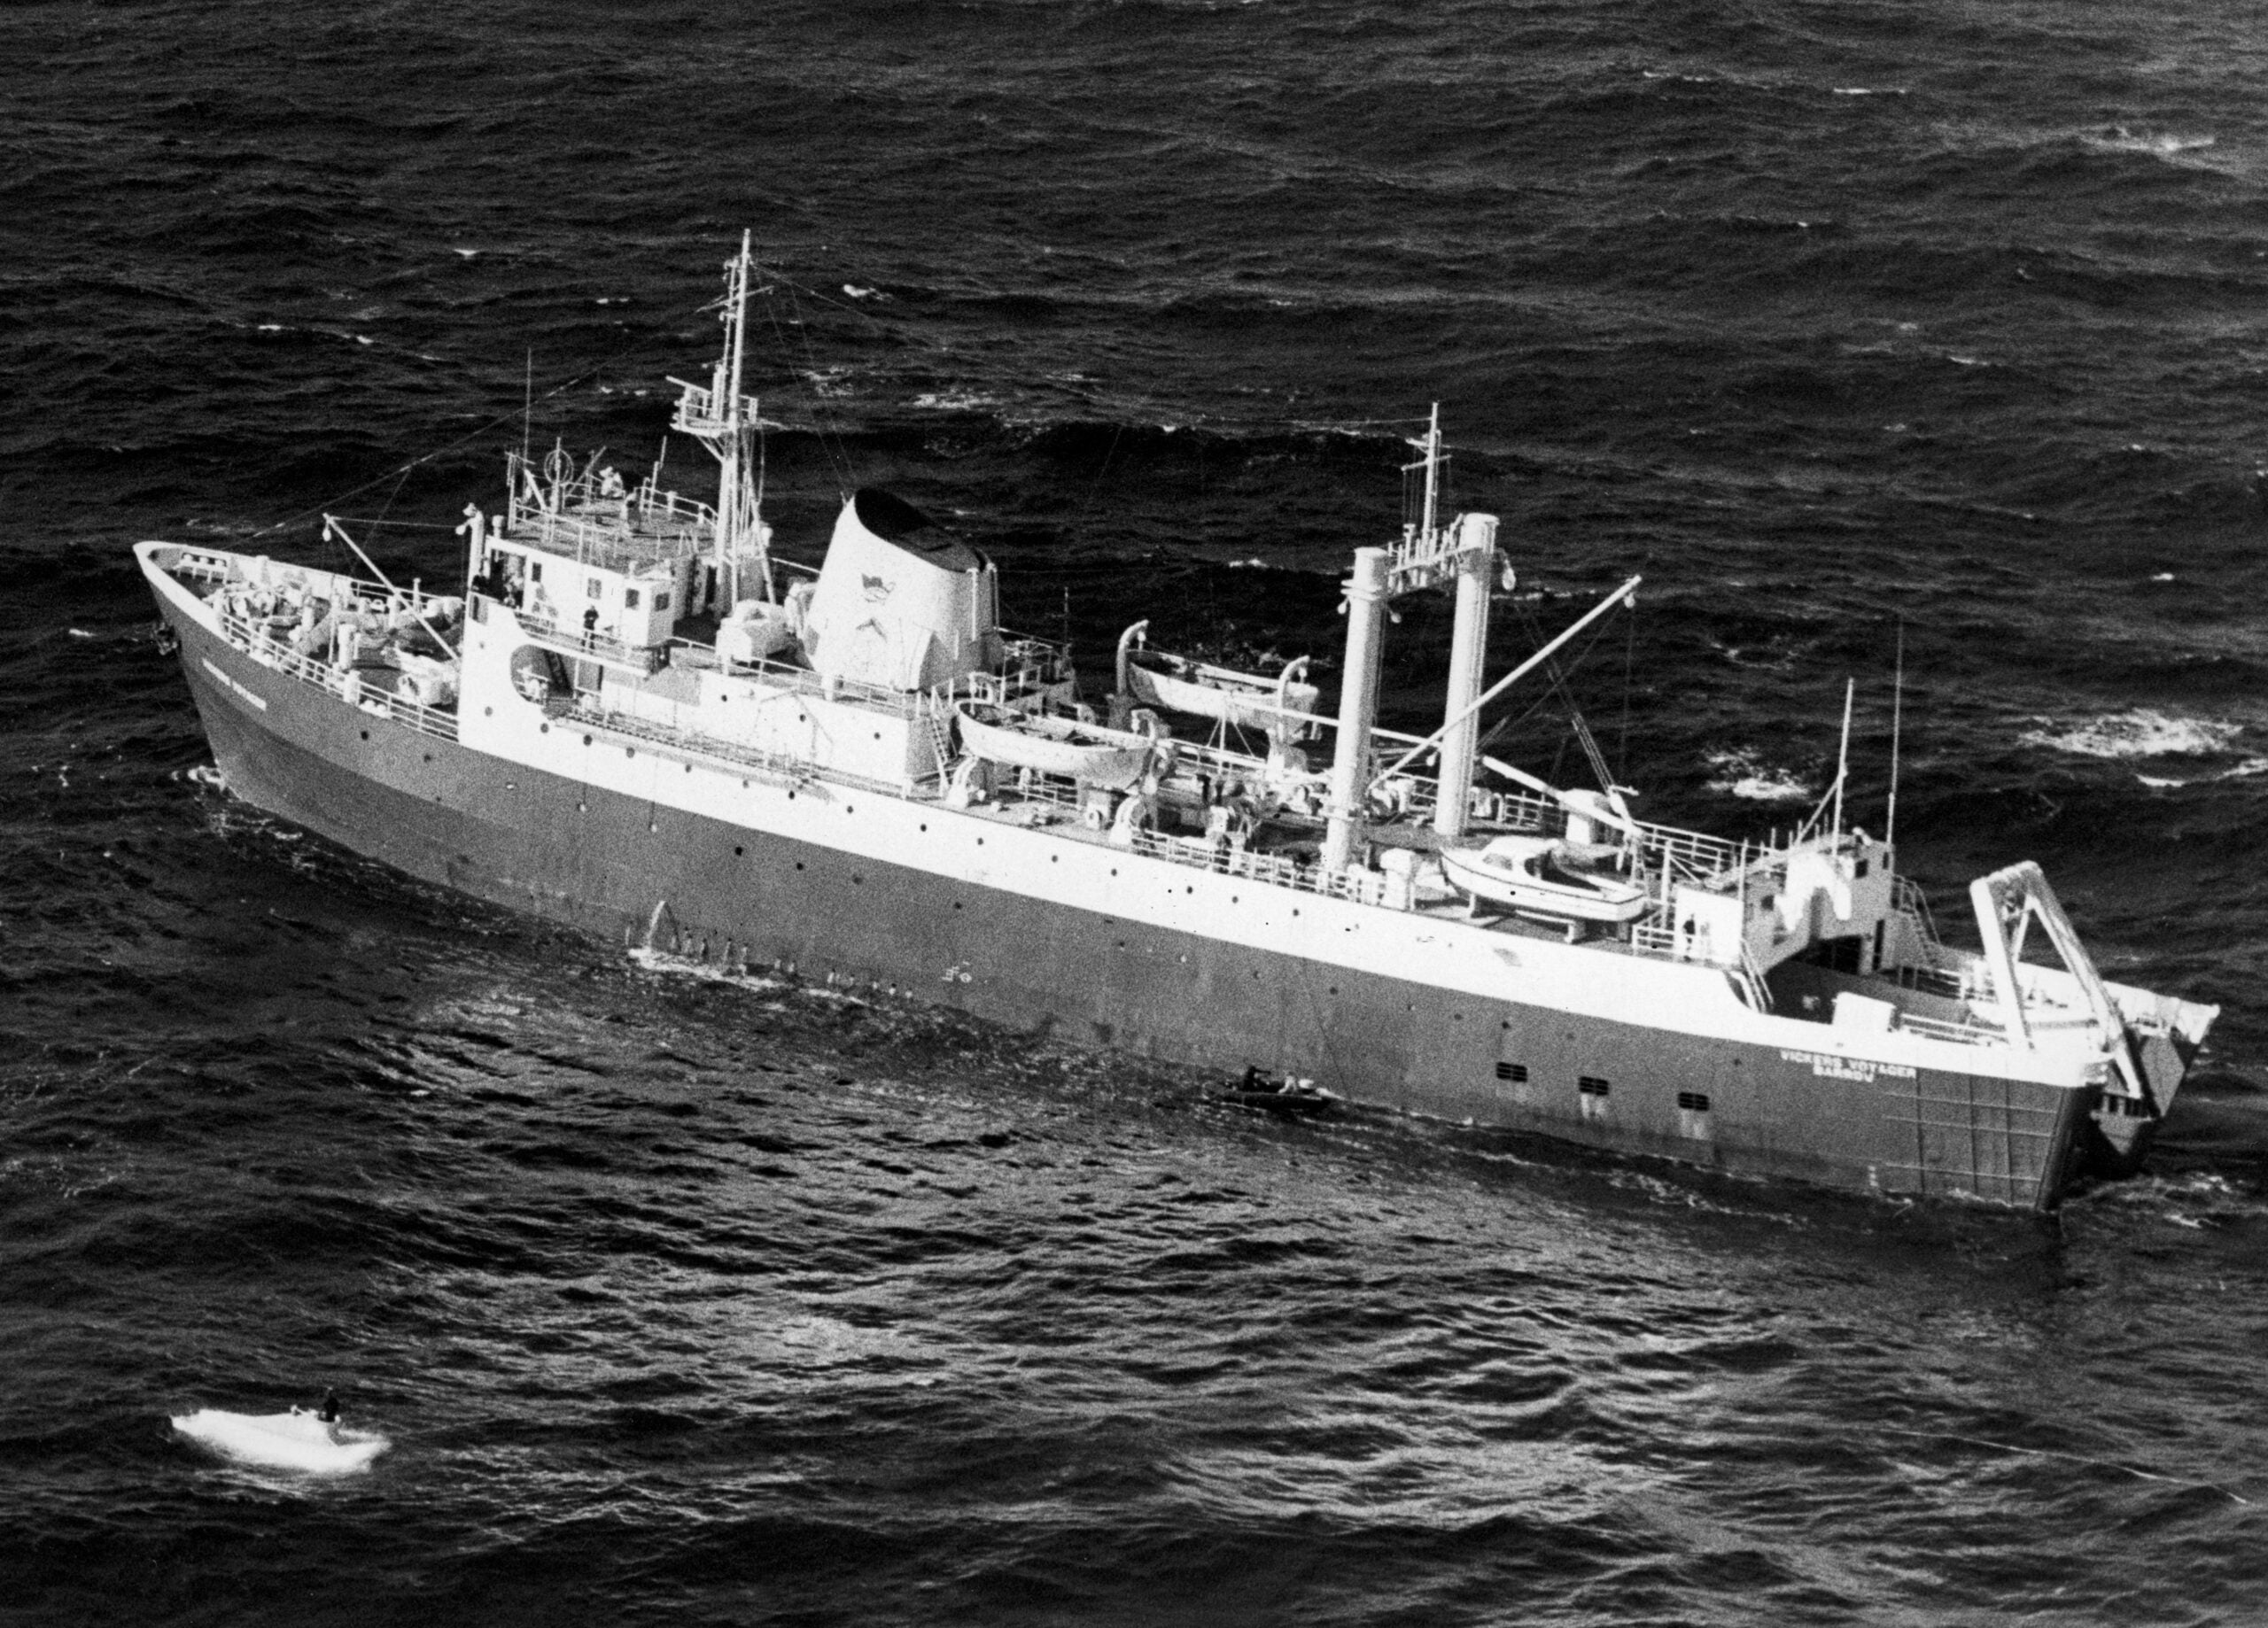 Mother ship Vickers Voyager with mini sub Pisces V after an attempt to locate the sub. Life line white nylon rope from the stern of the ship. 31st August 1973. (Photo by Daily Mirror/Mirrorpix/Mirrorpix via Getty Images)